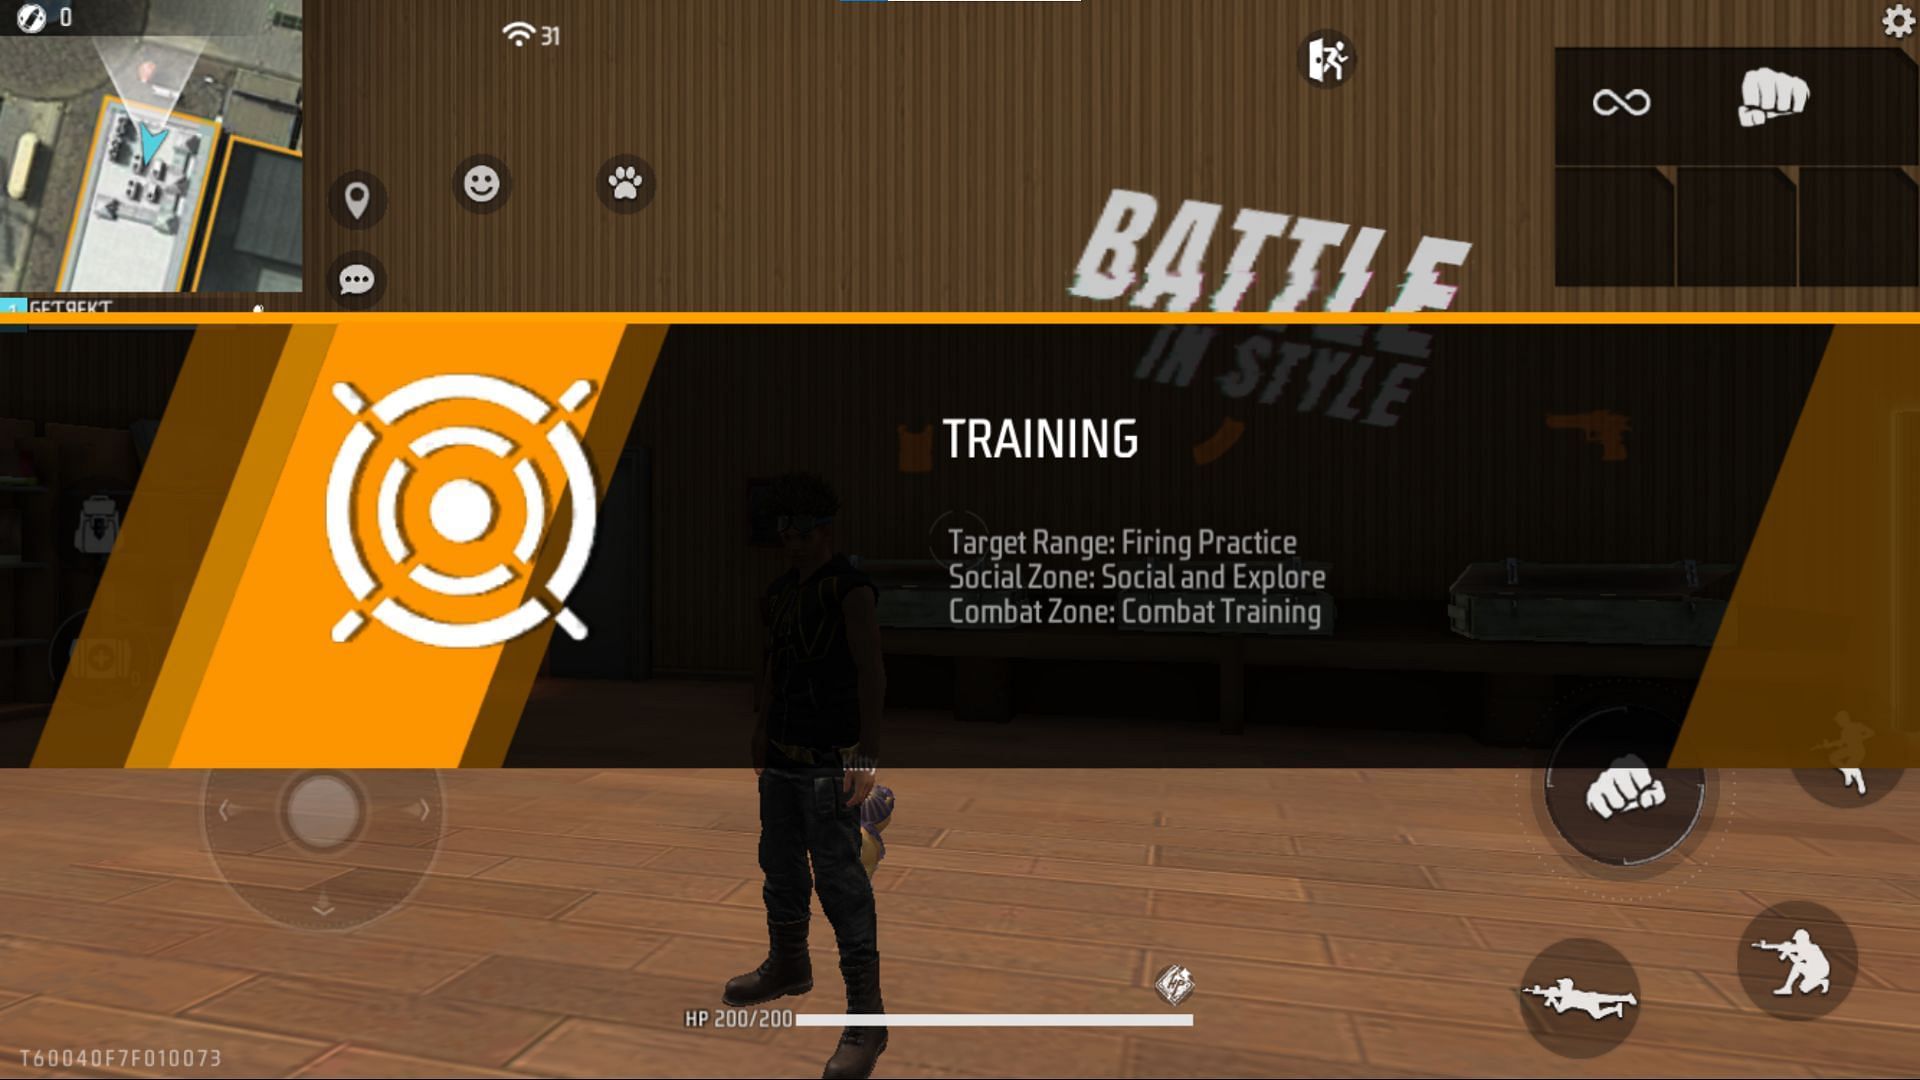 Training island can aid the players to become better at the game (Image via Garena)